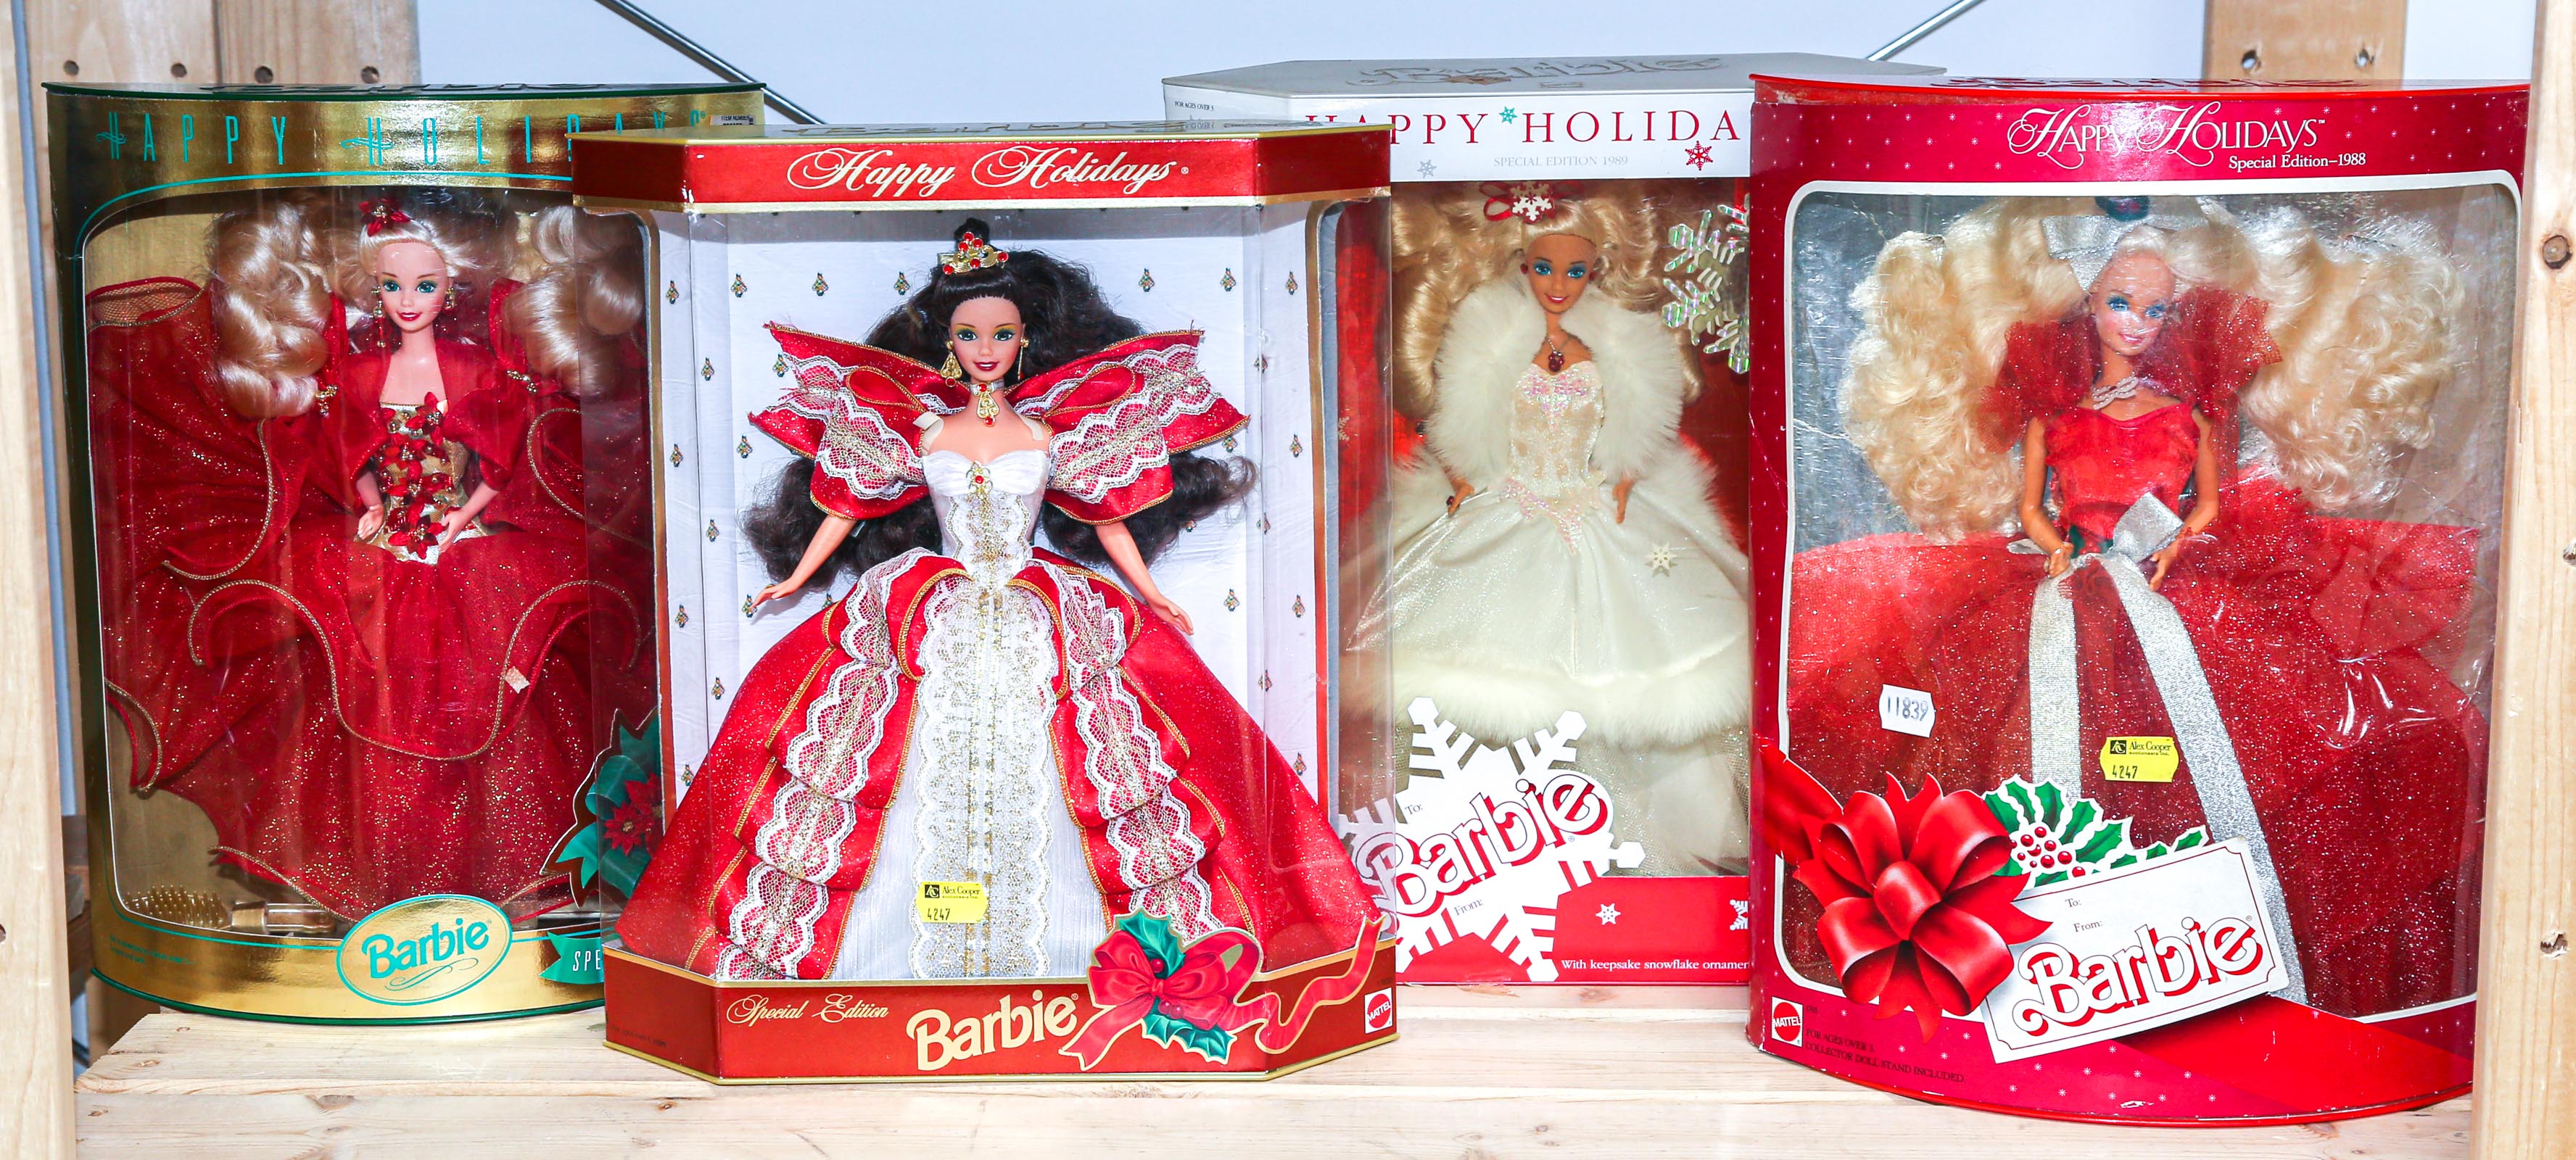 FOUR BOXED HAPPY HOLIDAY BARBIES